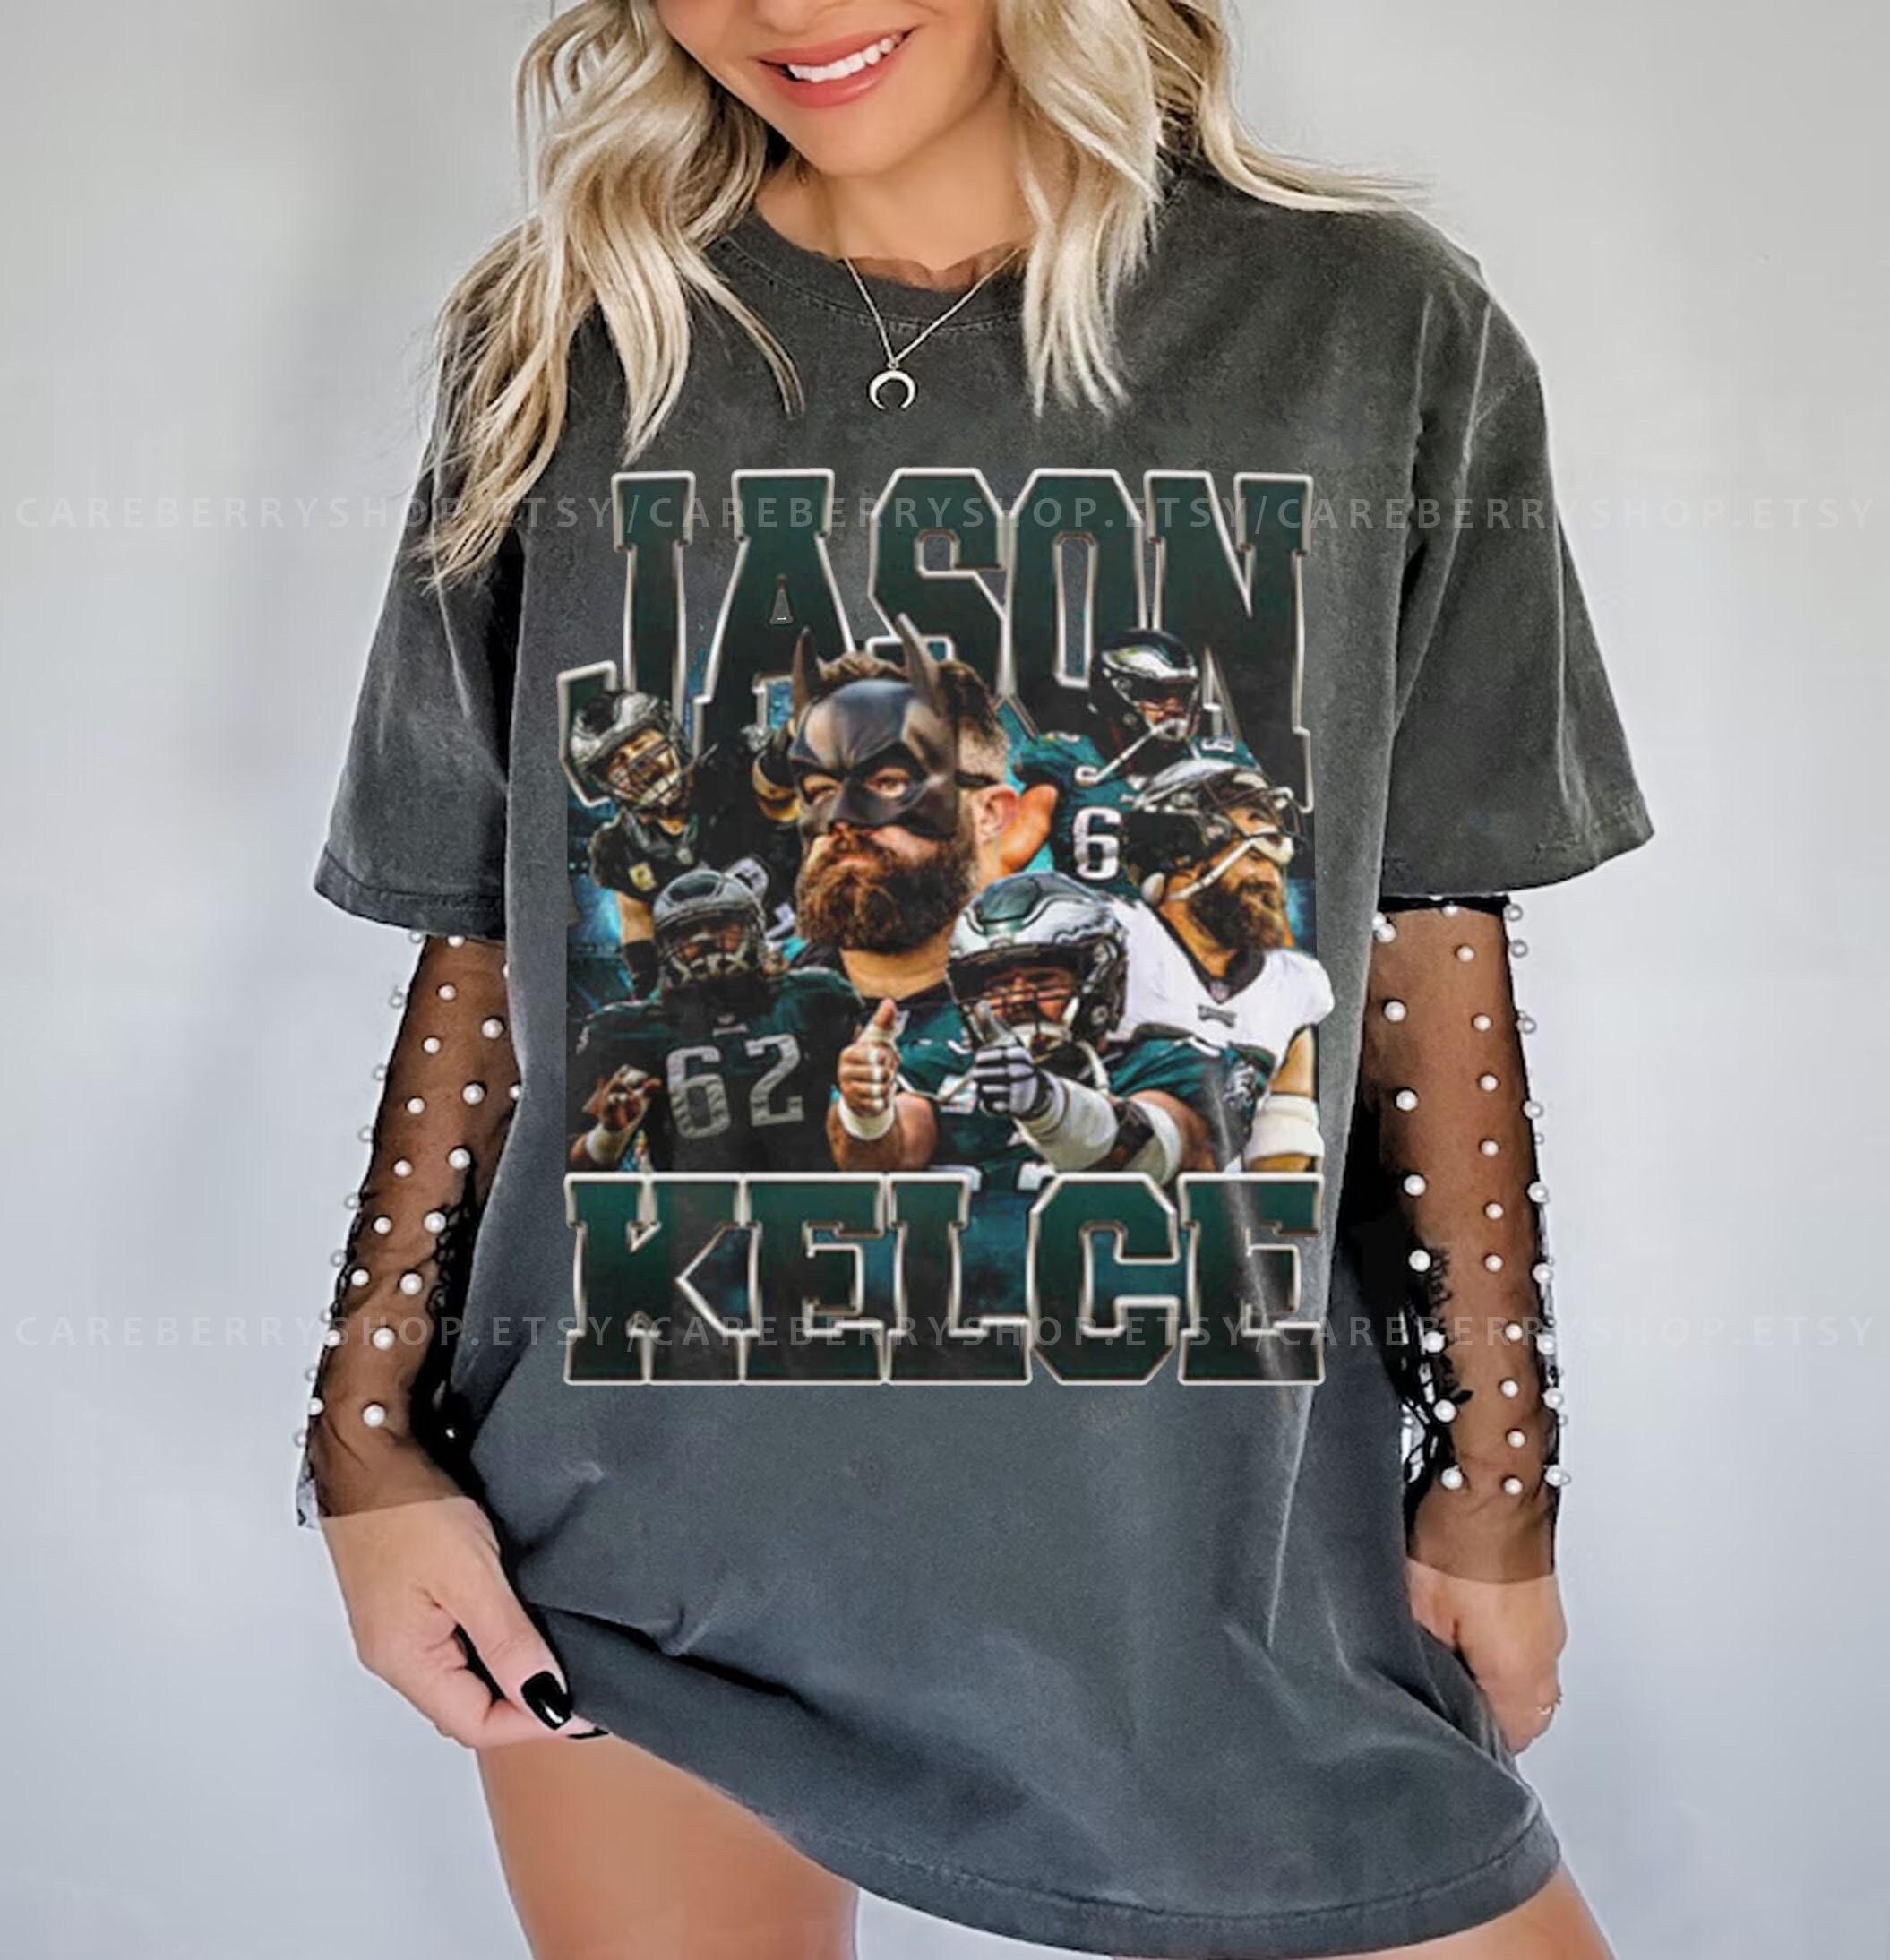 Jason Kelce Shirt 62 Classic Philadelphia Eagles Gift - Personalized Gifts:  Family, Sports, Occasions, Trending